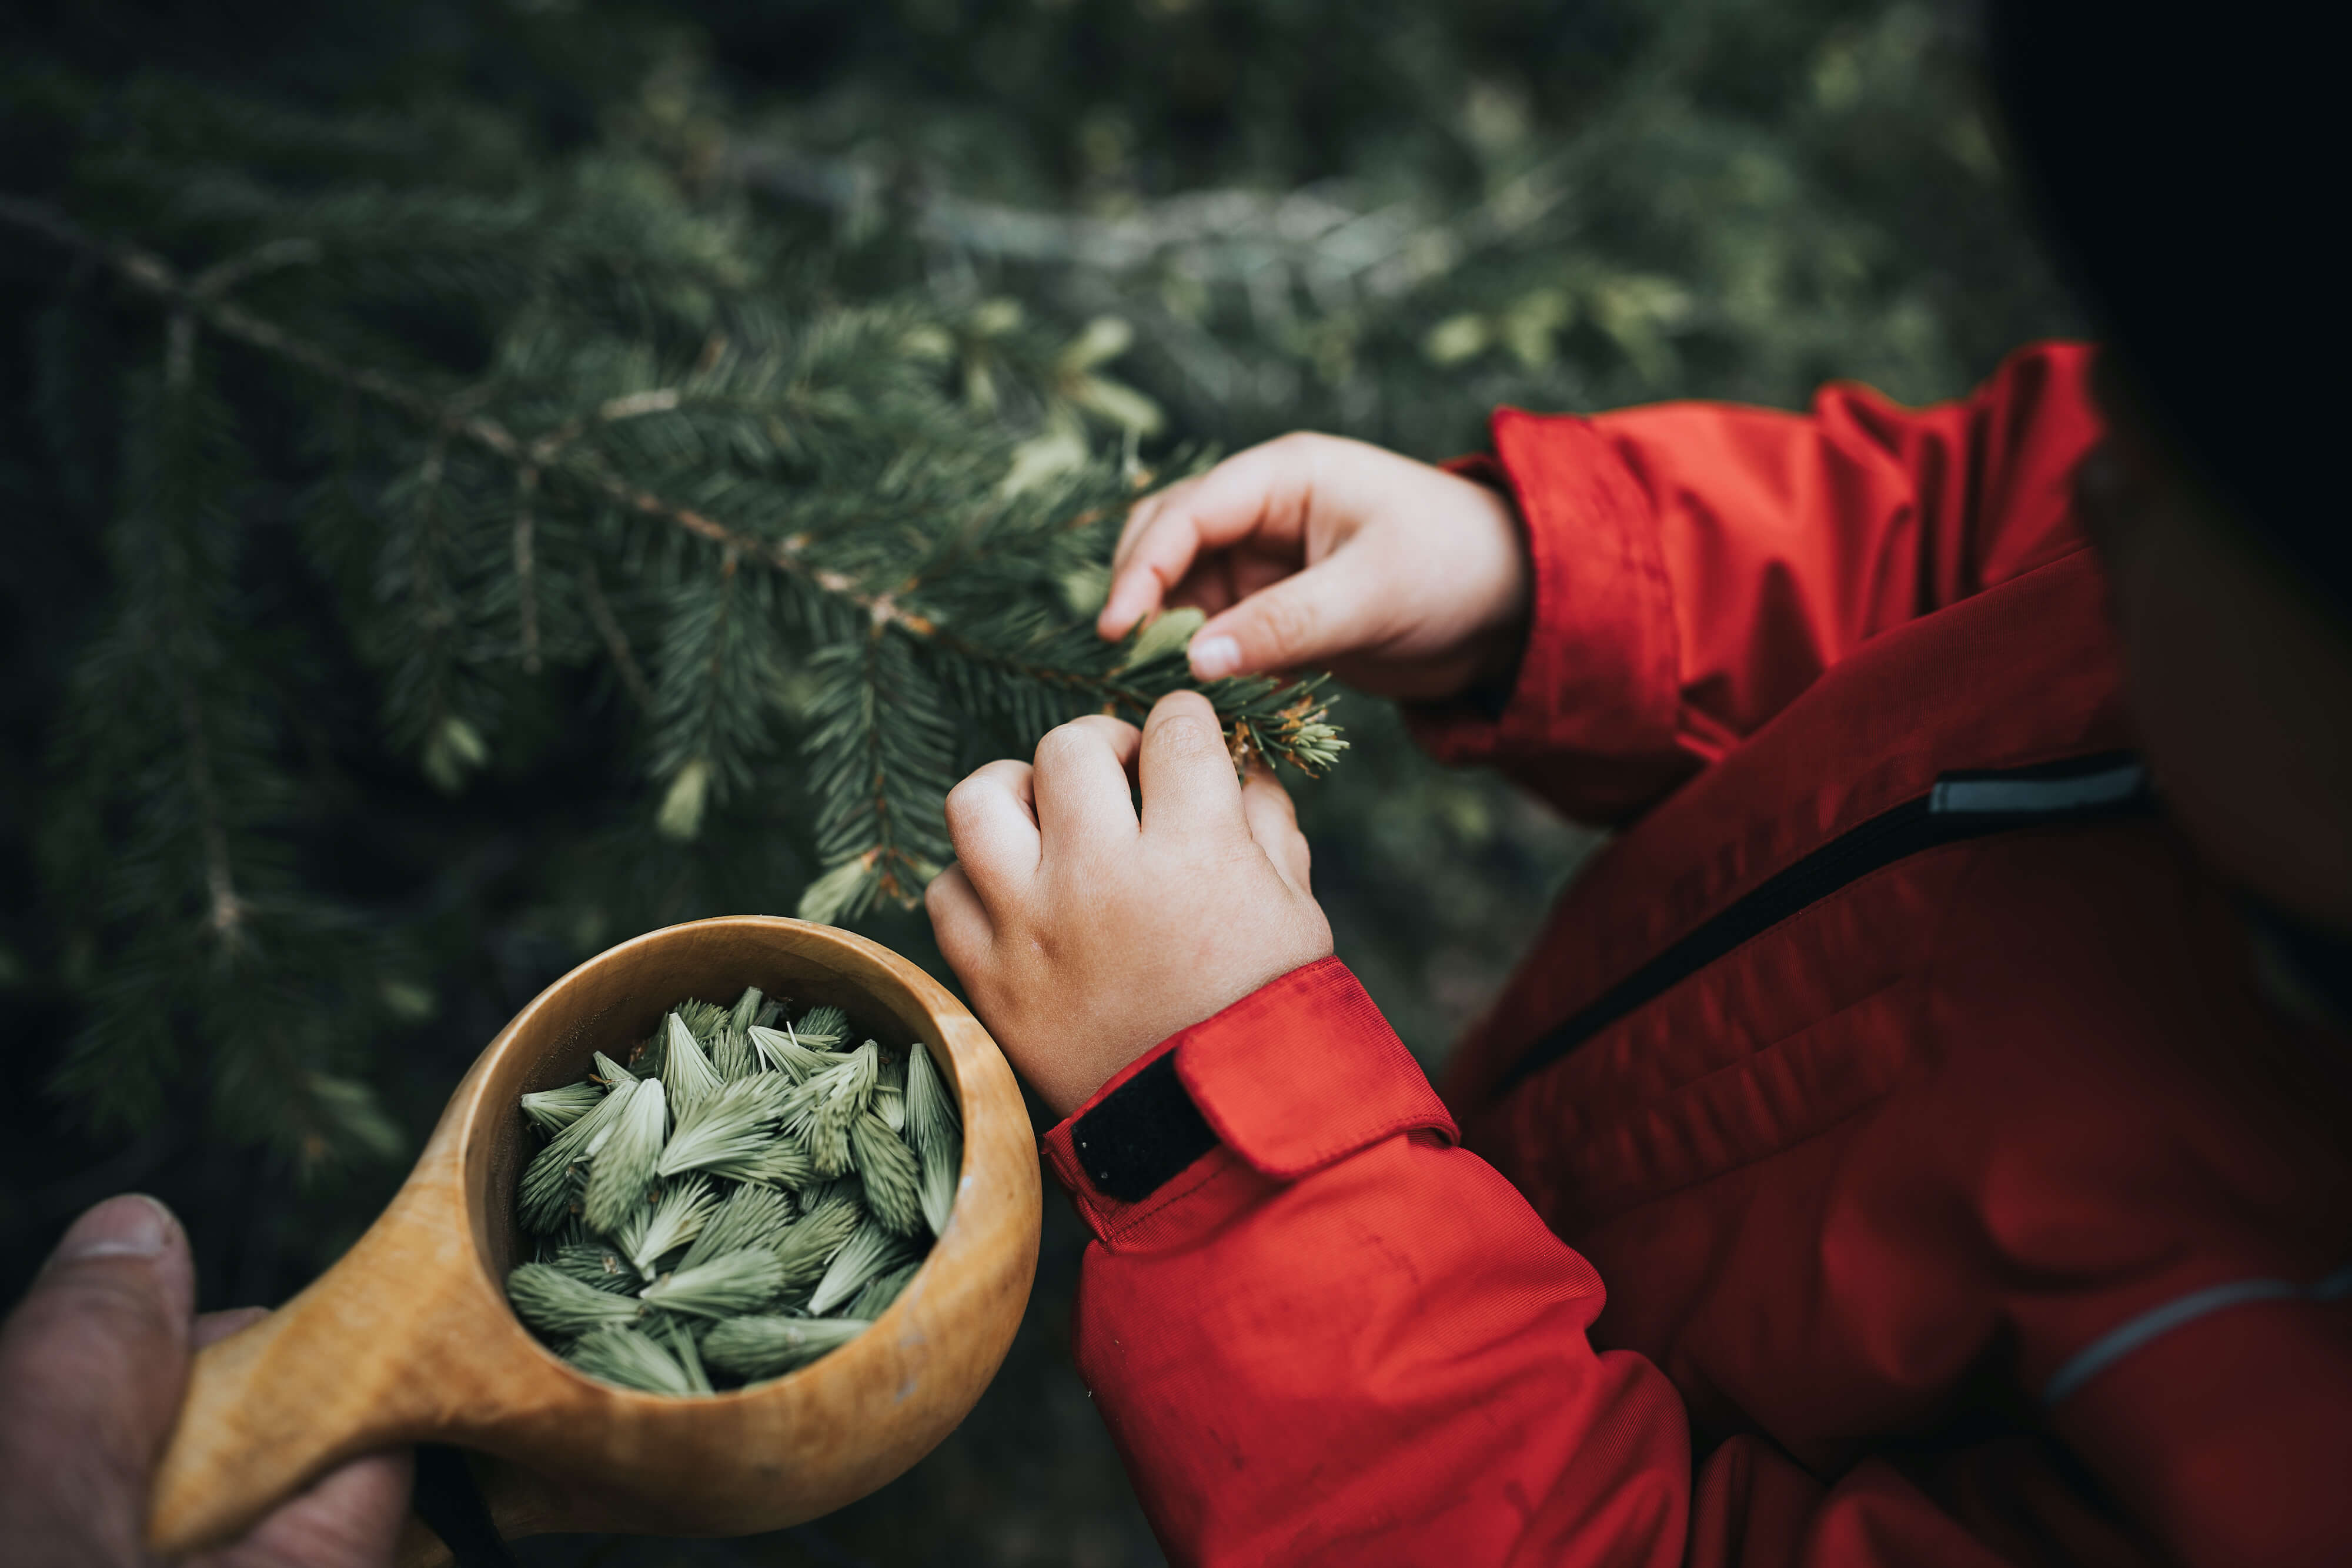 A child collecting young tips of a spruce tree.